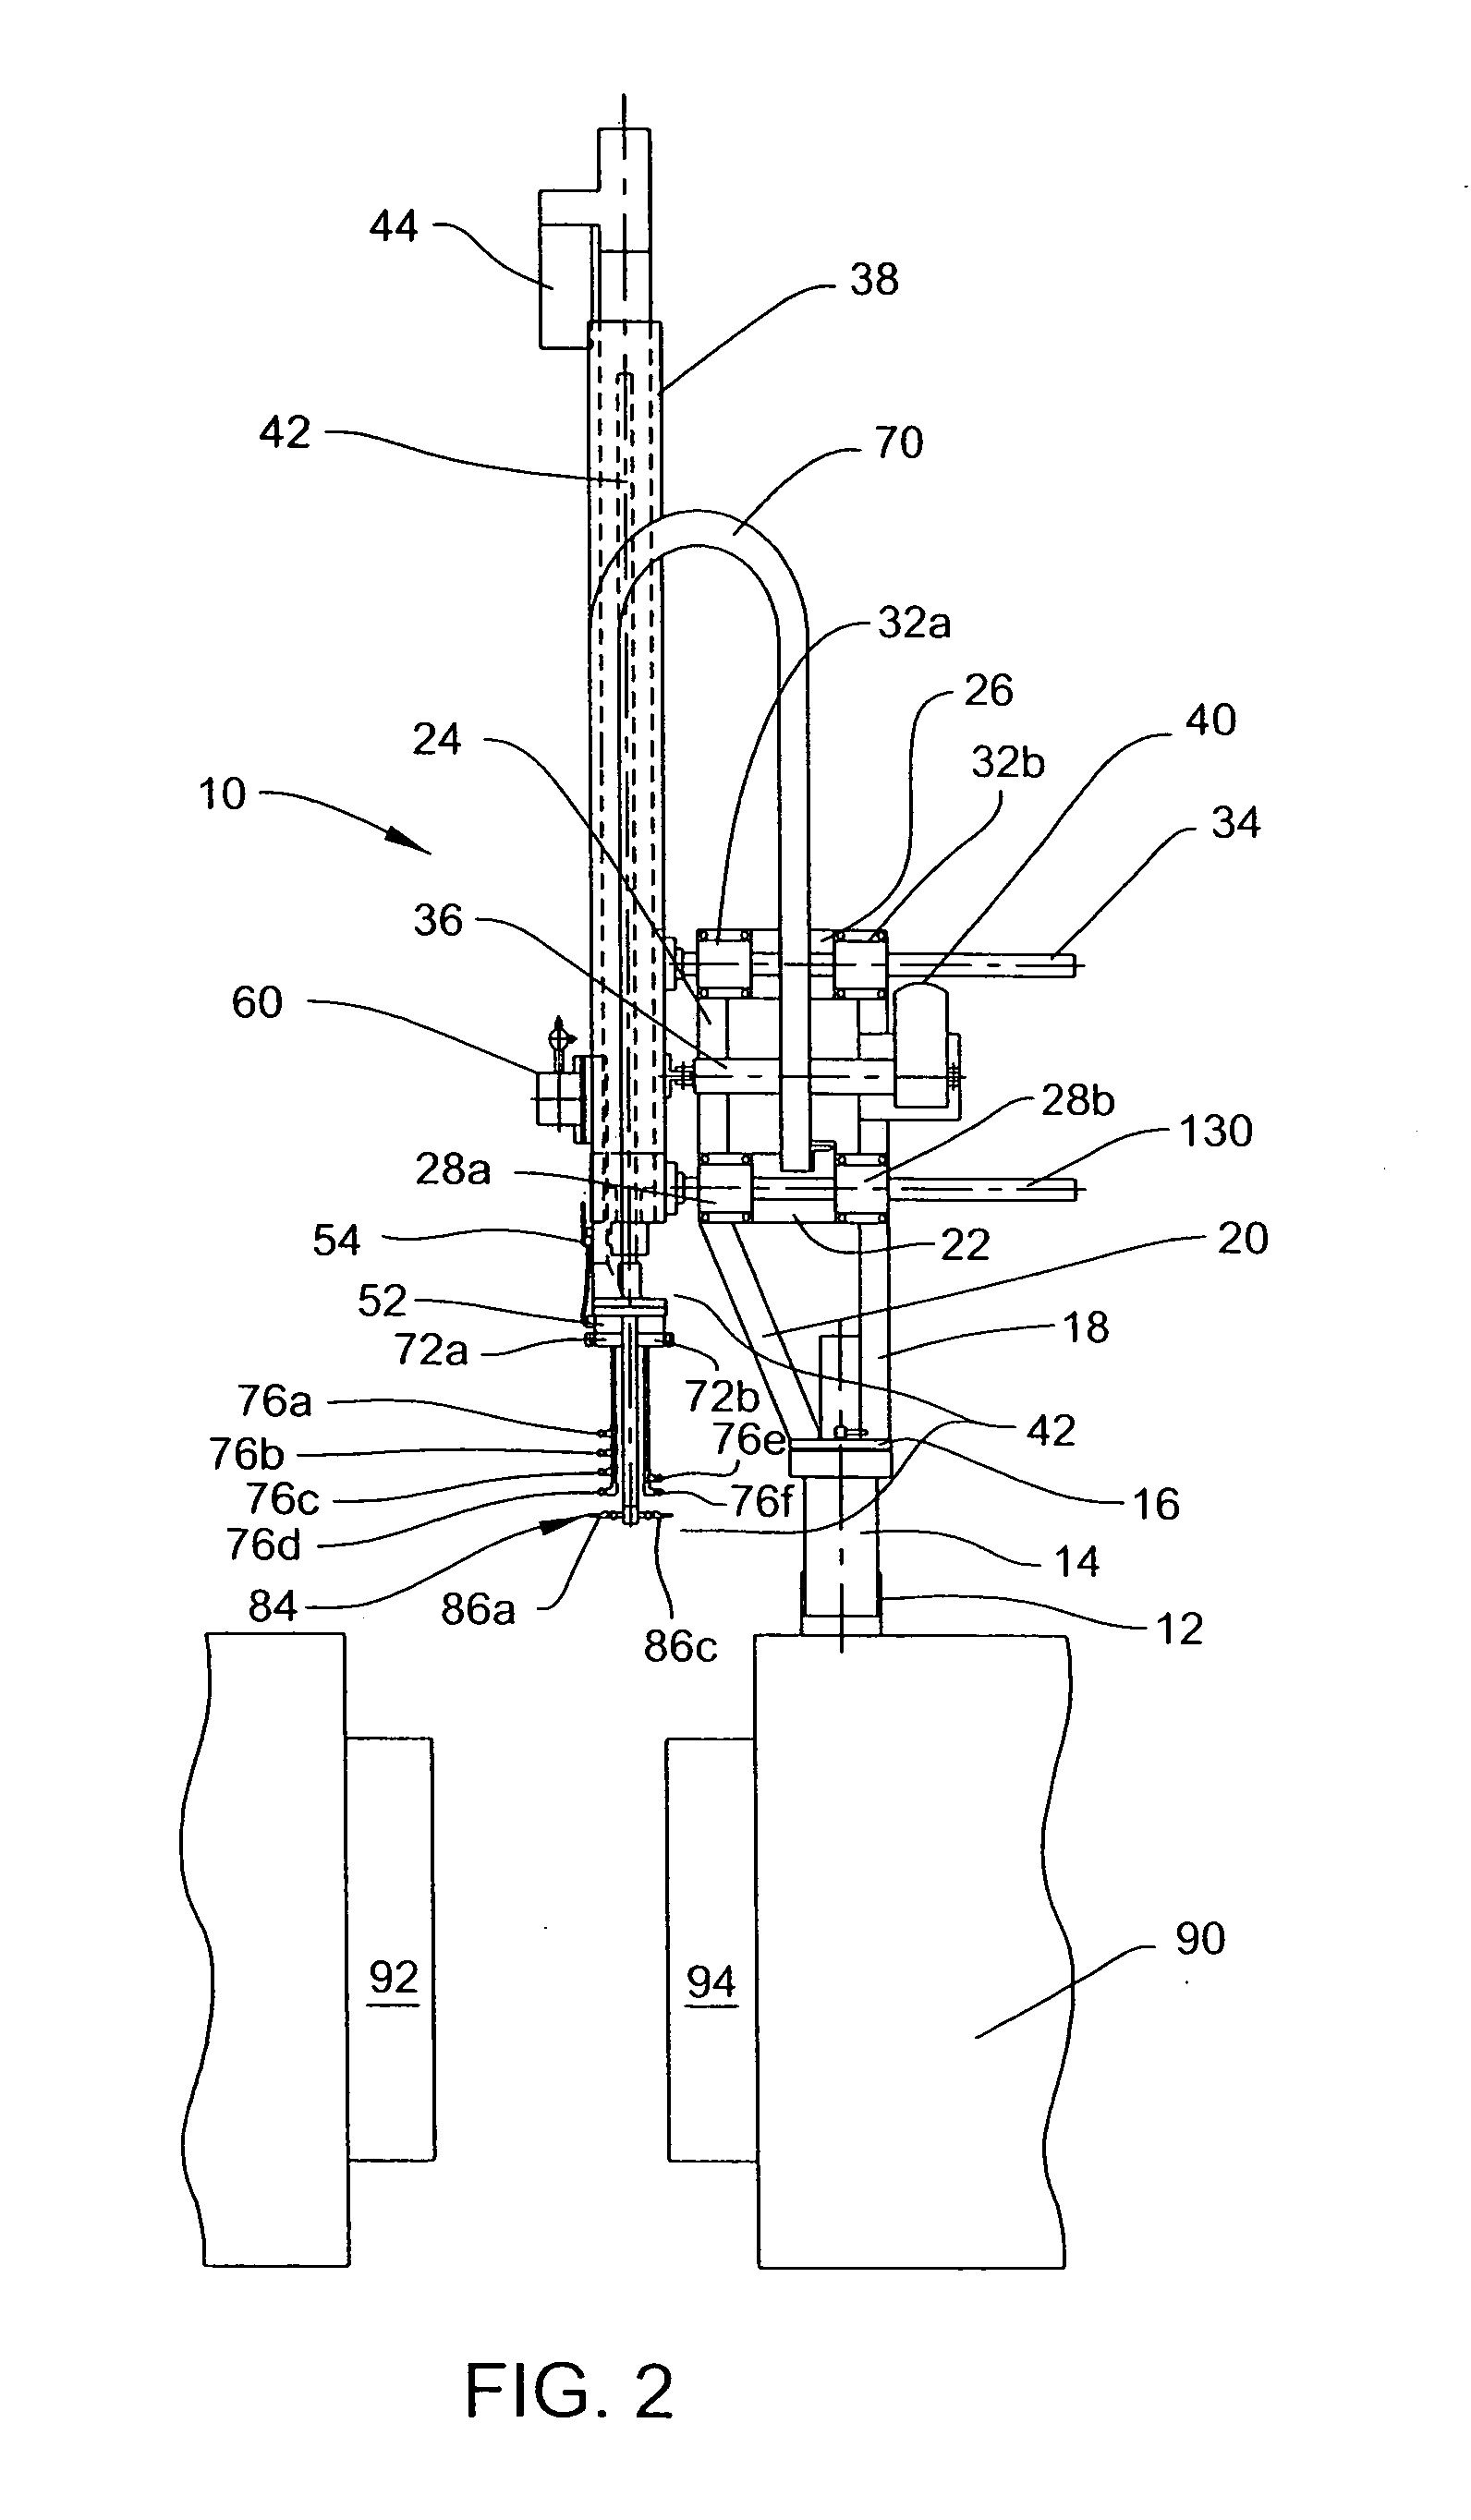 Spray system having a dosing device for a molding process